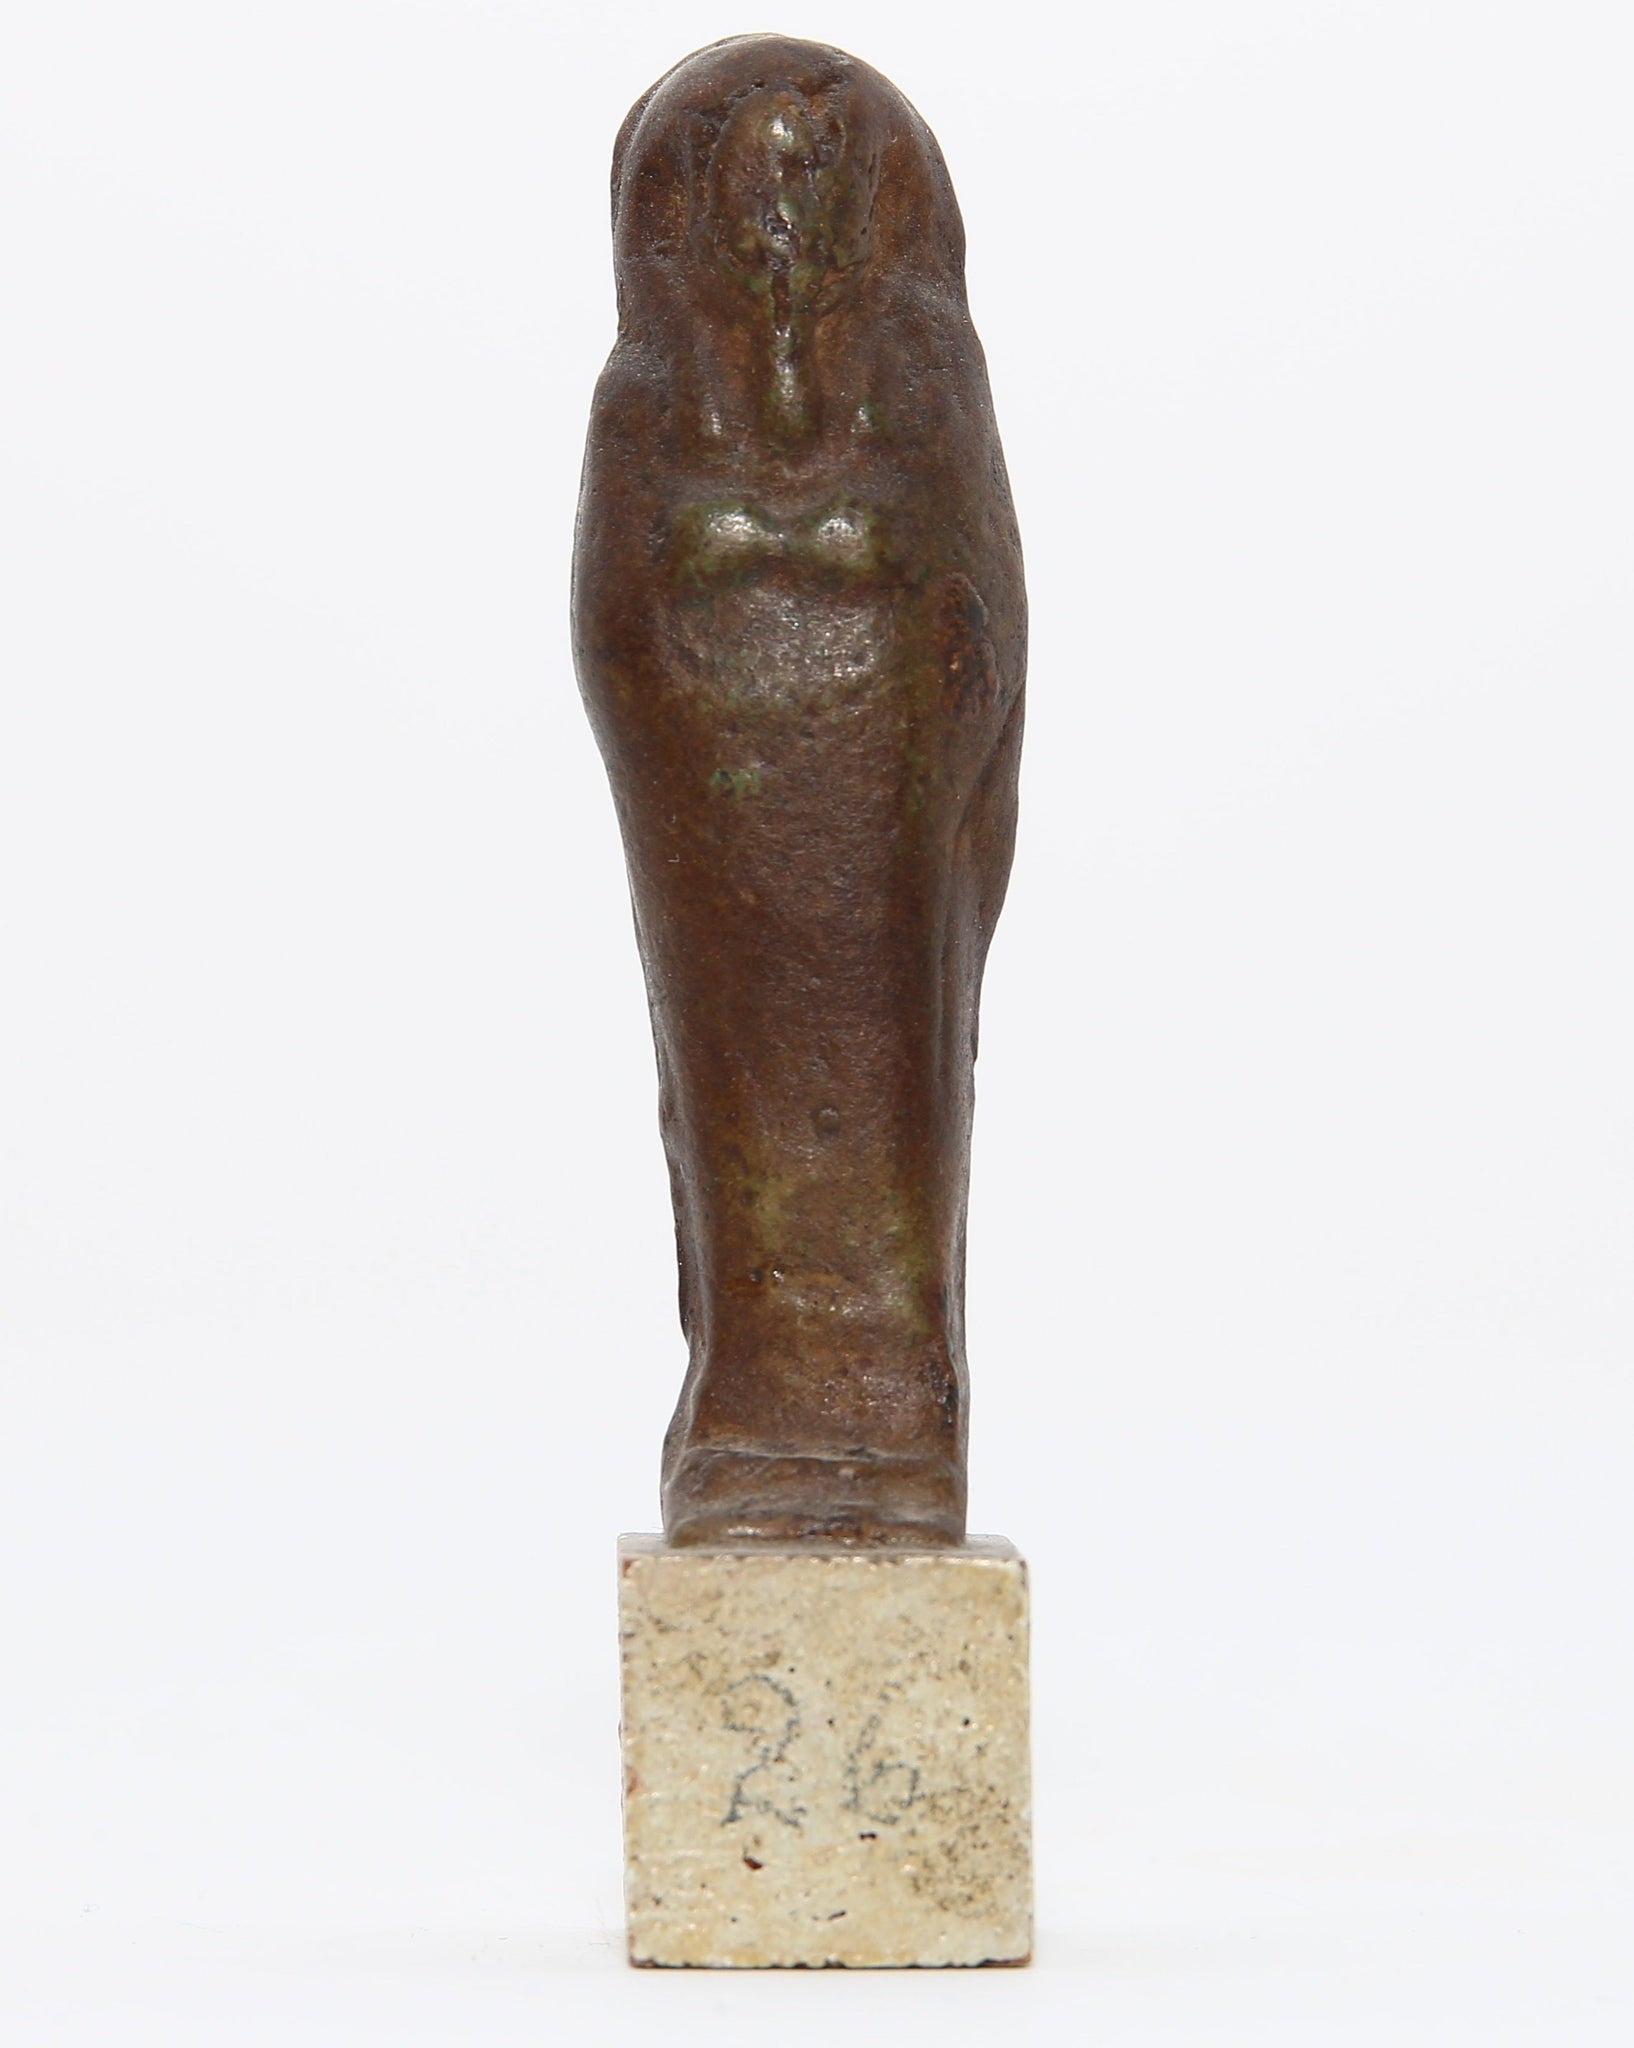 A glazed faience shabti figure with hieroglyphic inscription | End of Late Period, c. 4th Century BC